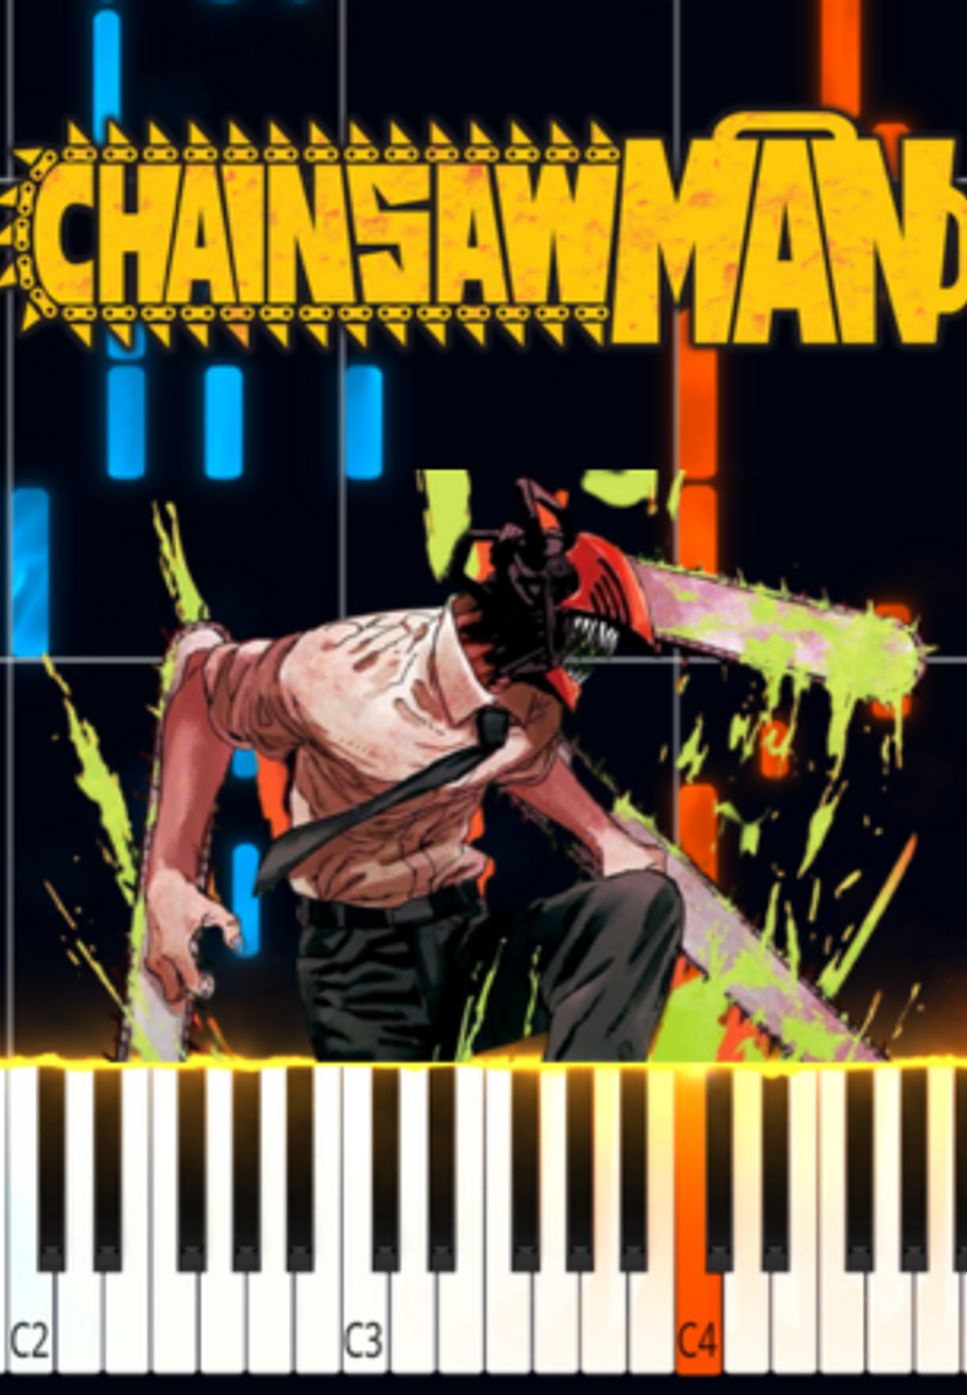 Hawatari 2-Oku Centi (From Chainsaw Man) - TV-Size - song and